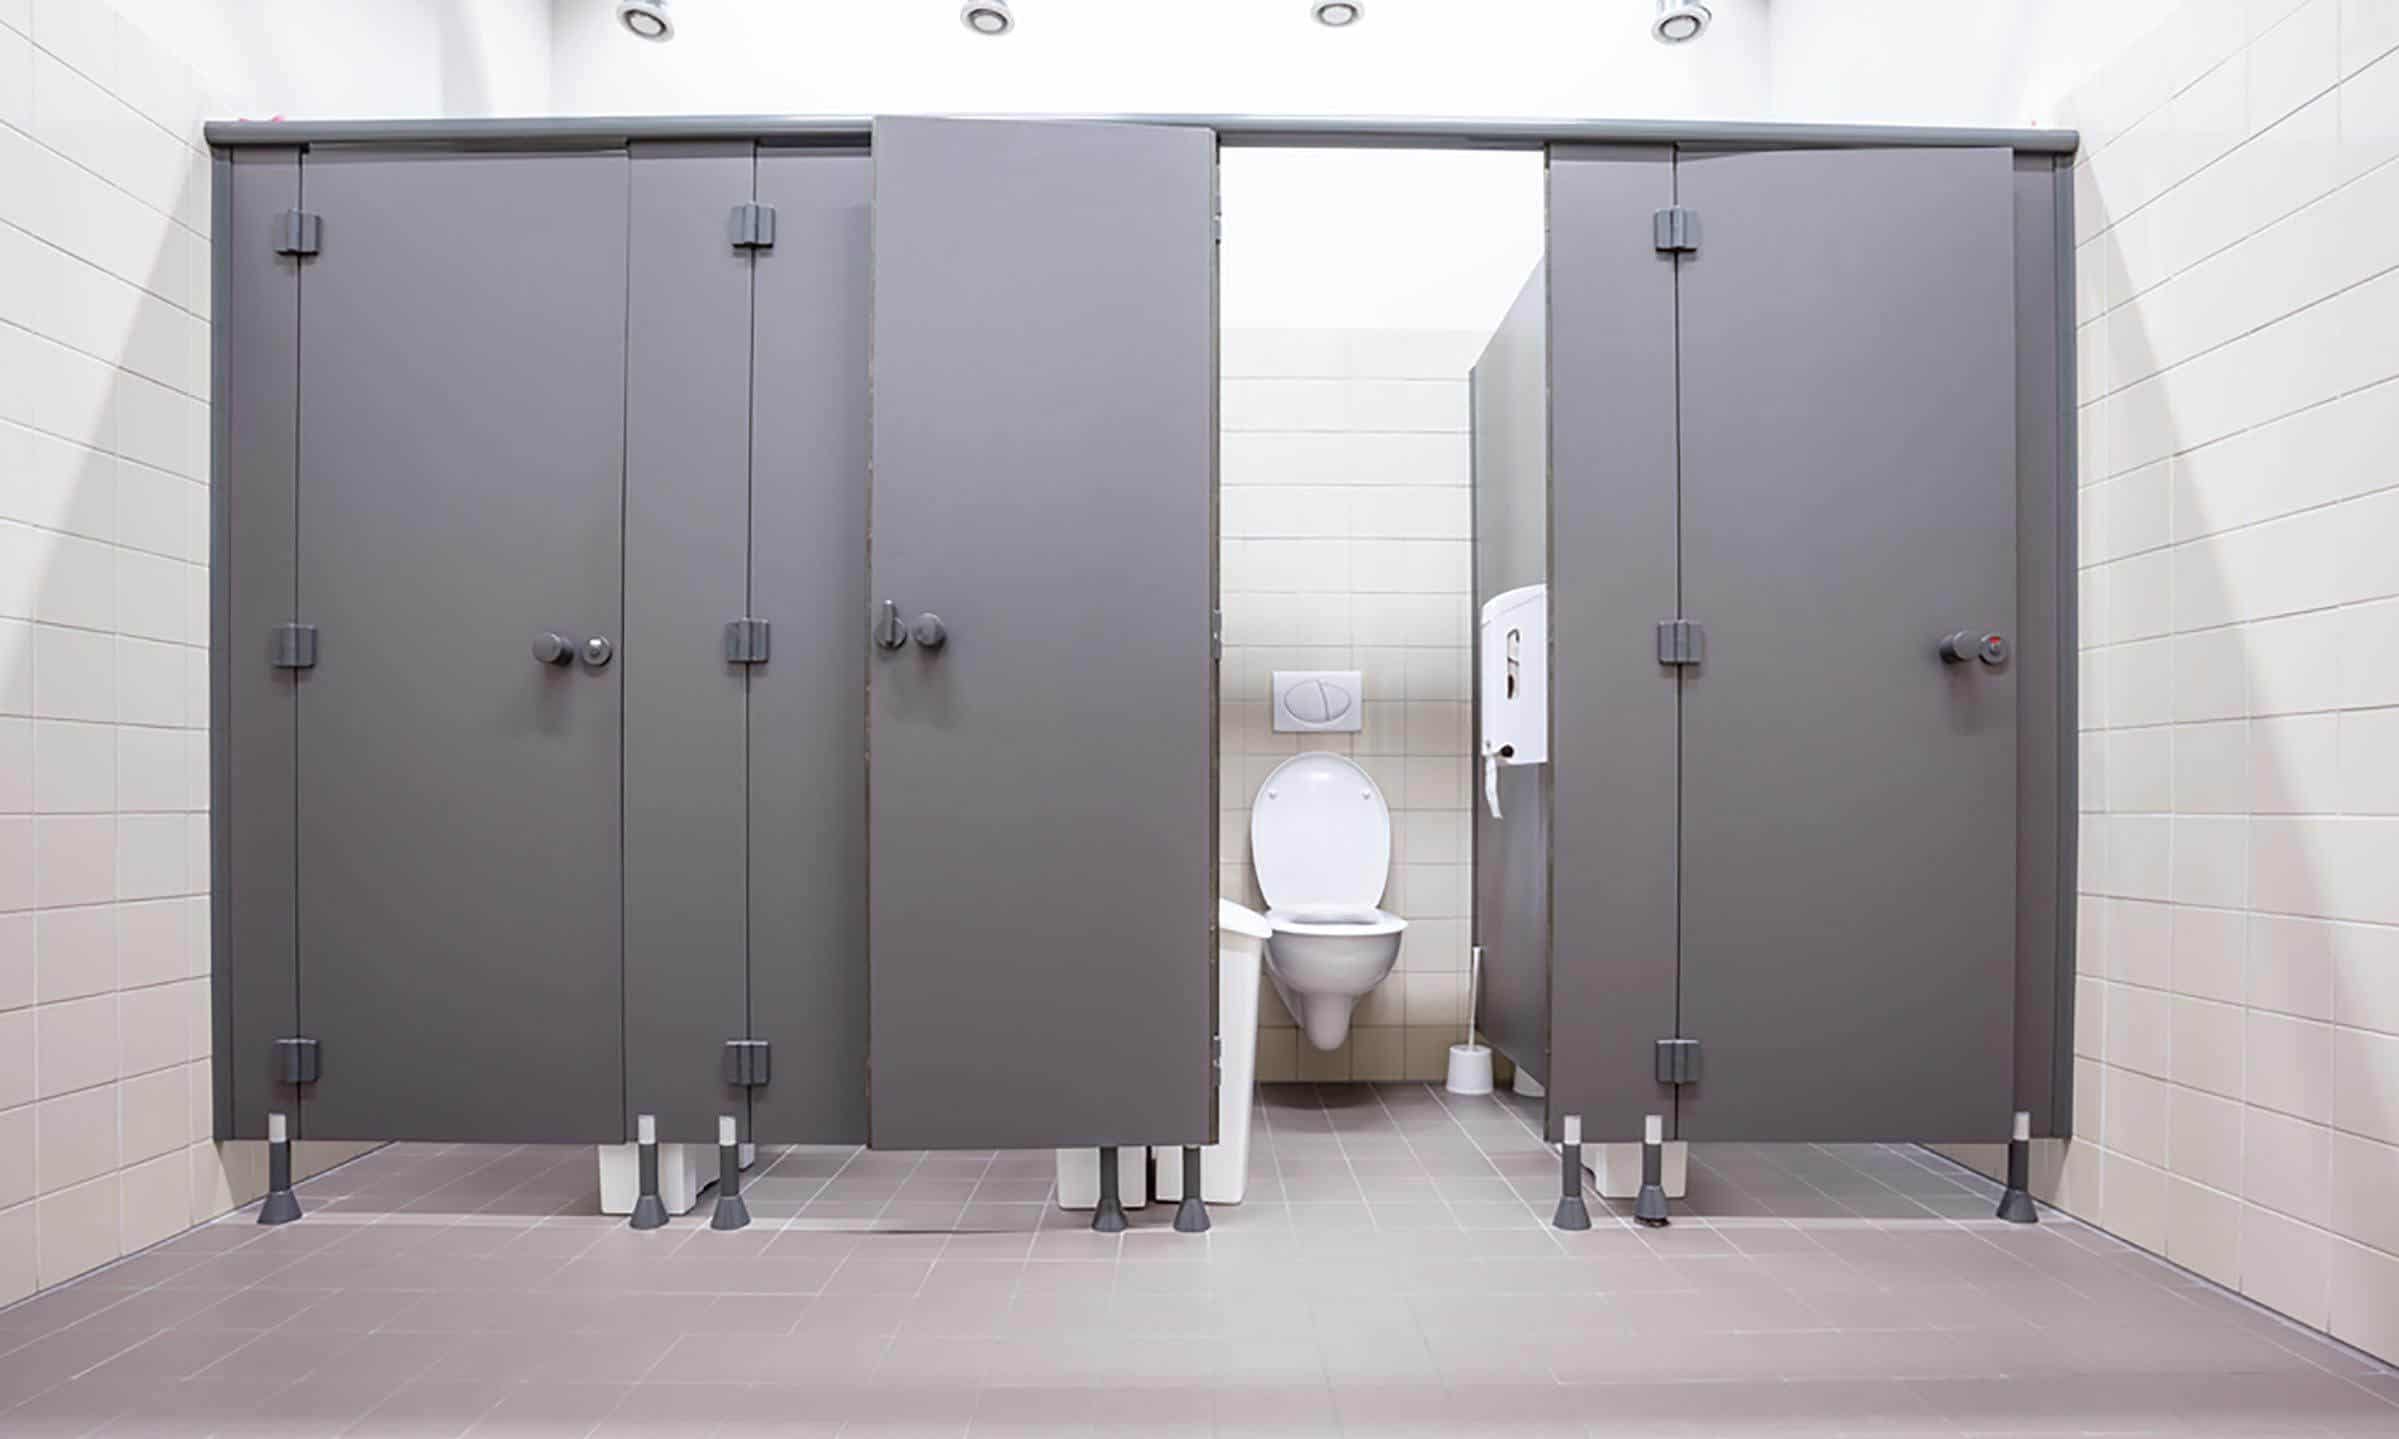 How To Install Bathroom Stalls